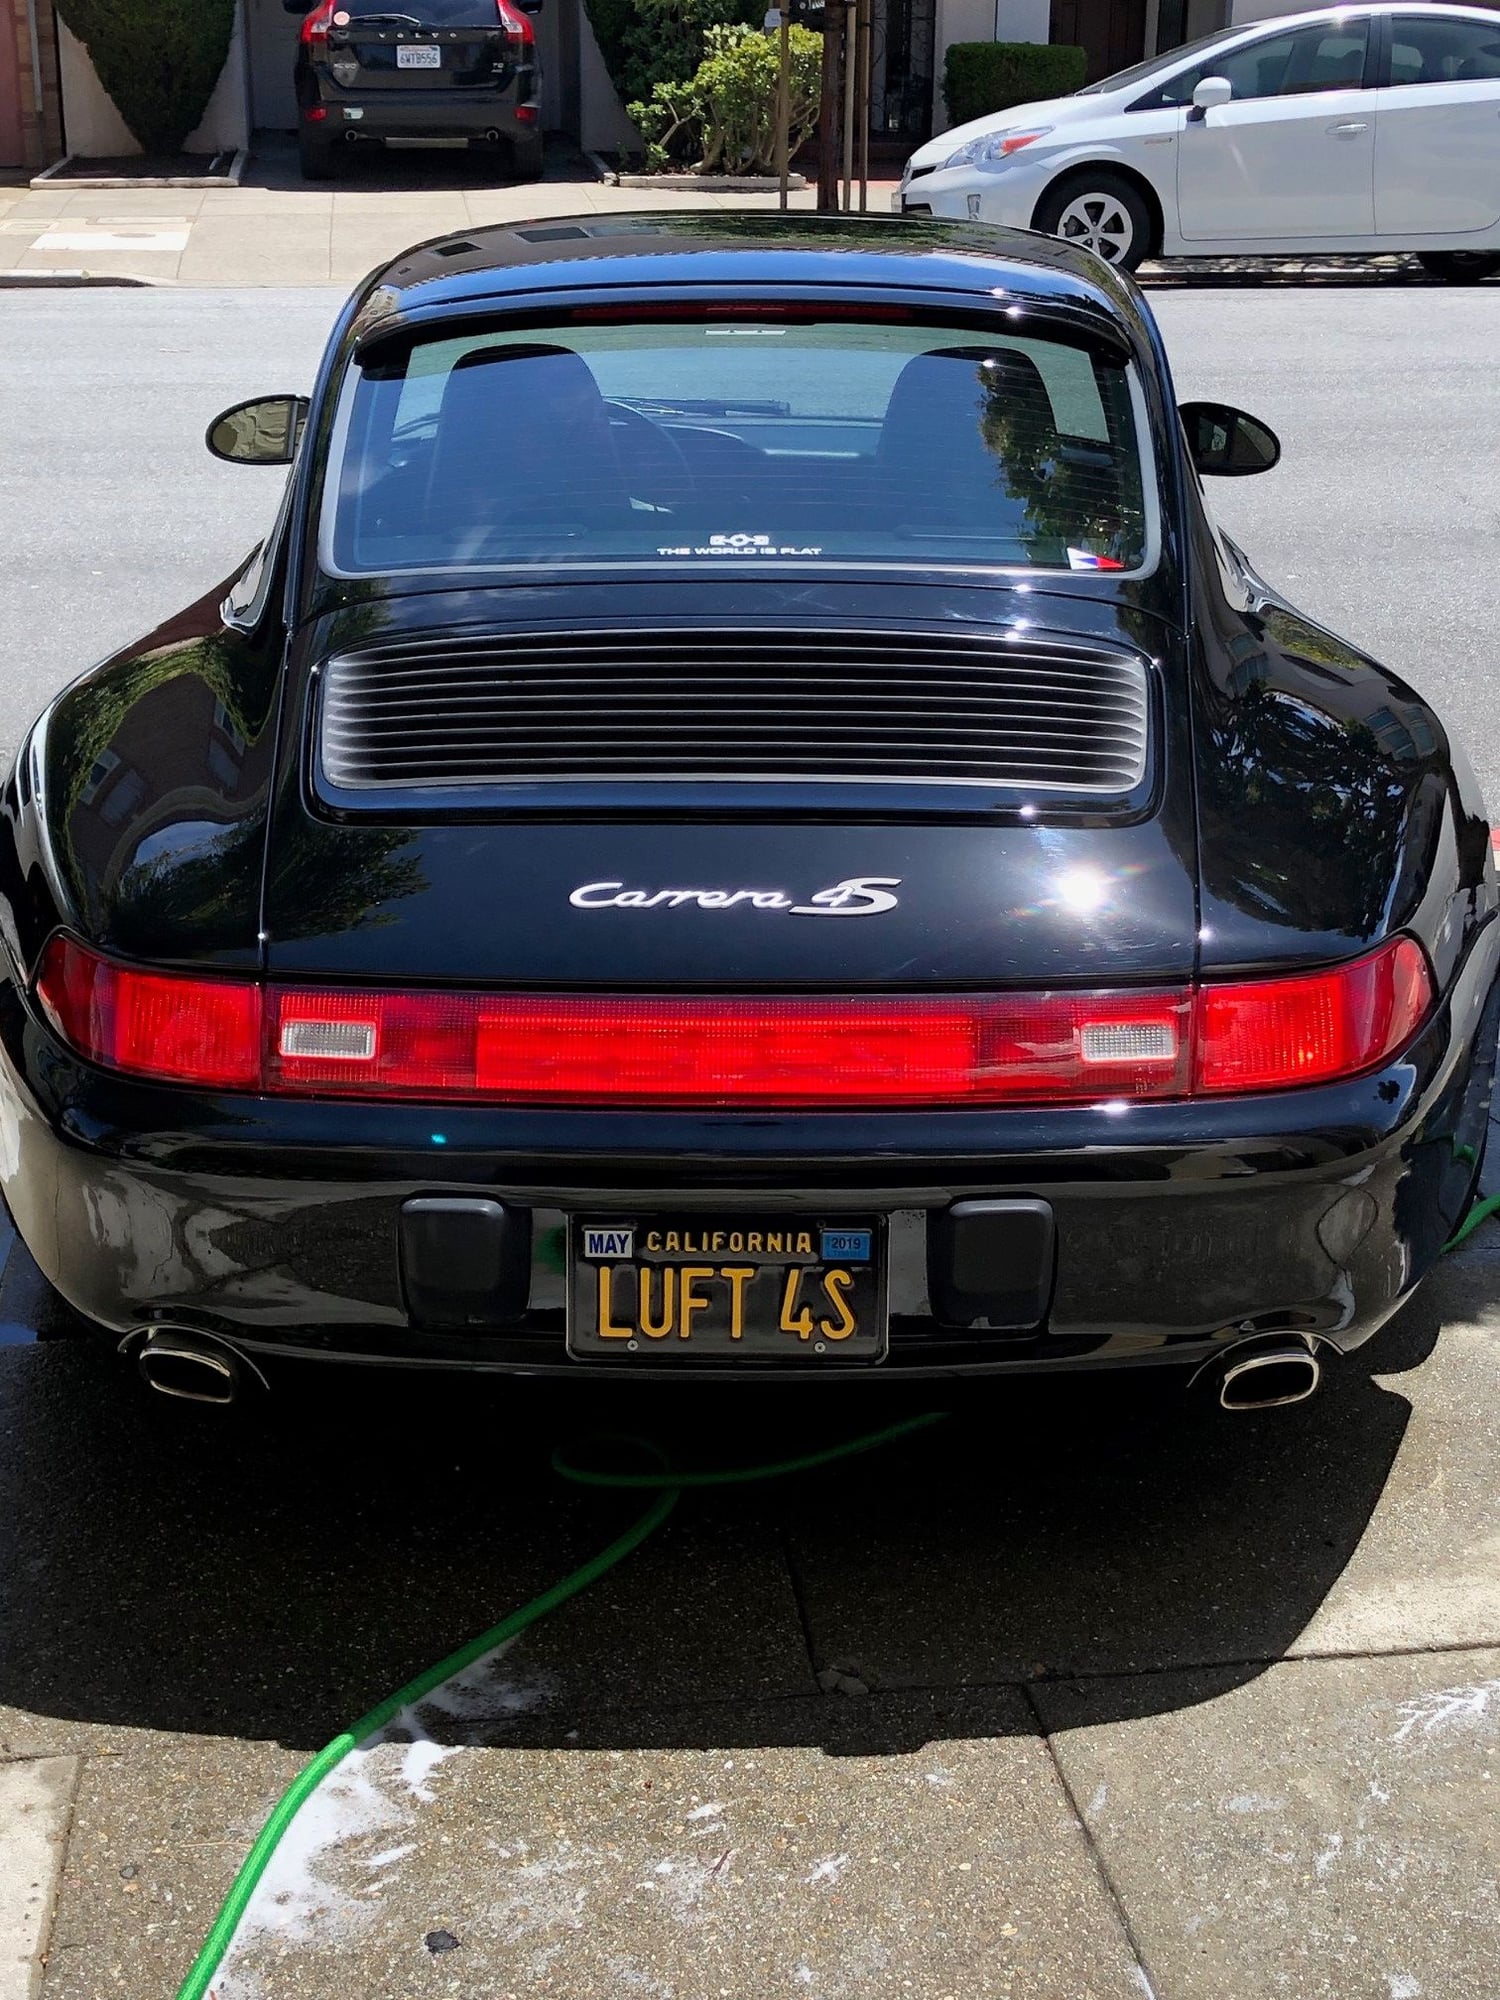 1996 Porsche 911 - 1996 C4S Black on Black - 34.7k miles - Used - VIN WP0AA2997TS323484 - 34,750 Miles - 6 cyl - AWD - Manual - Coupe - Black - San Francisco, CA 94123, United States